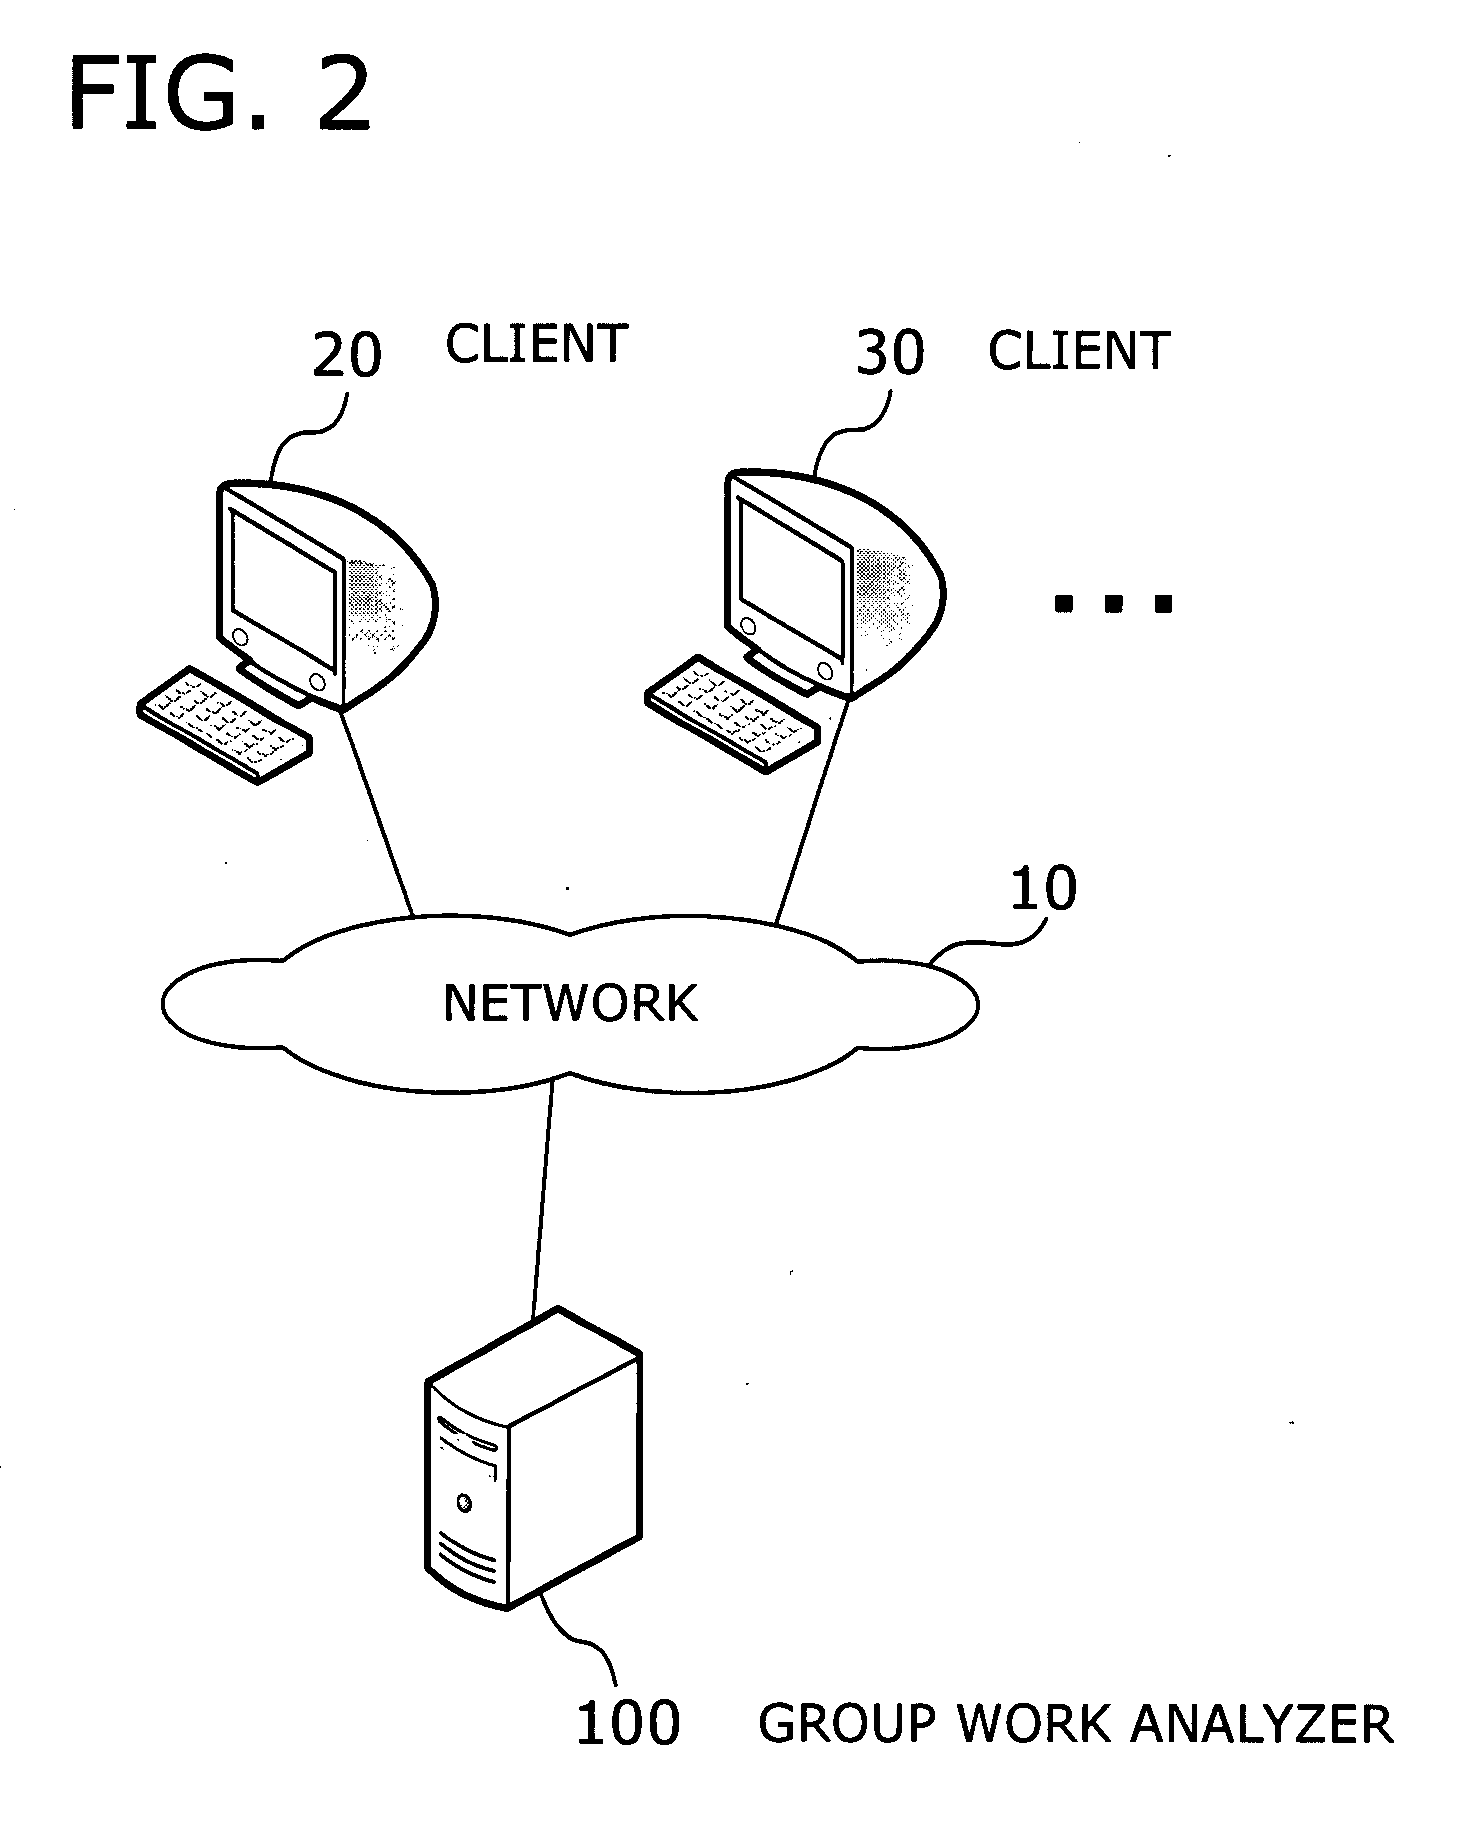 Program, method, and apparatus for analyzing group work activities in a project